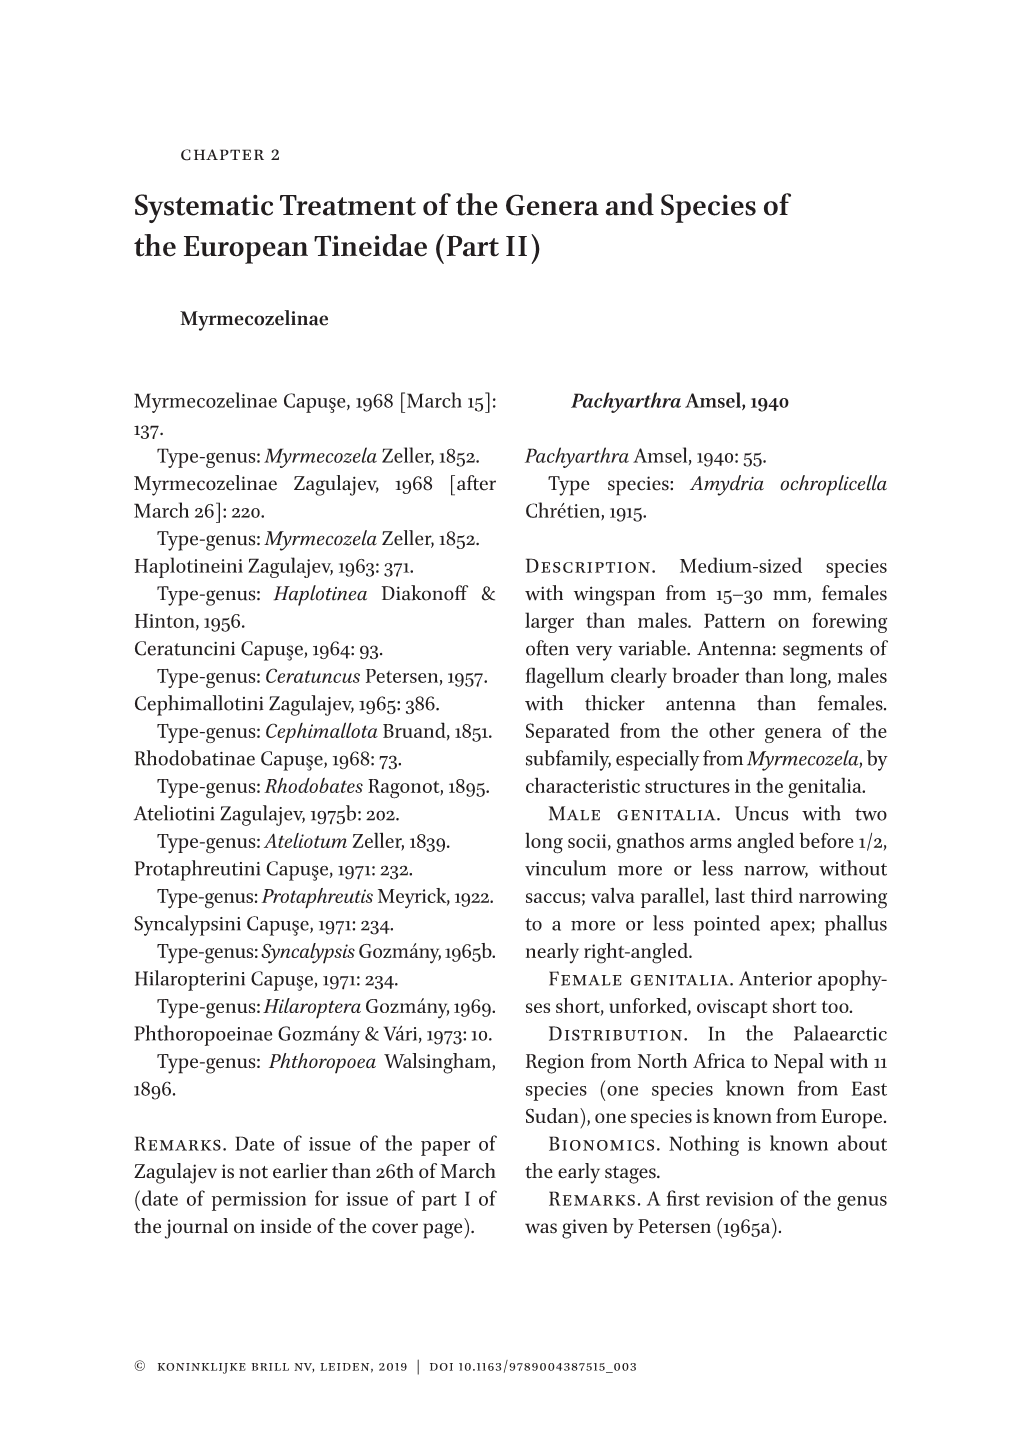 Systematic Treatment of the Genera and Species of the European Tineidae (Part II)